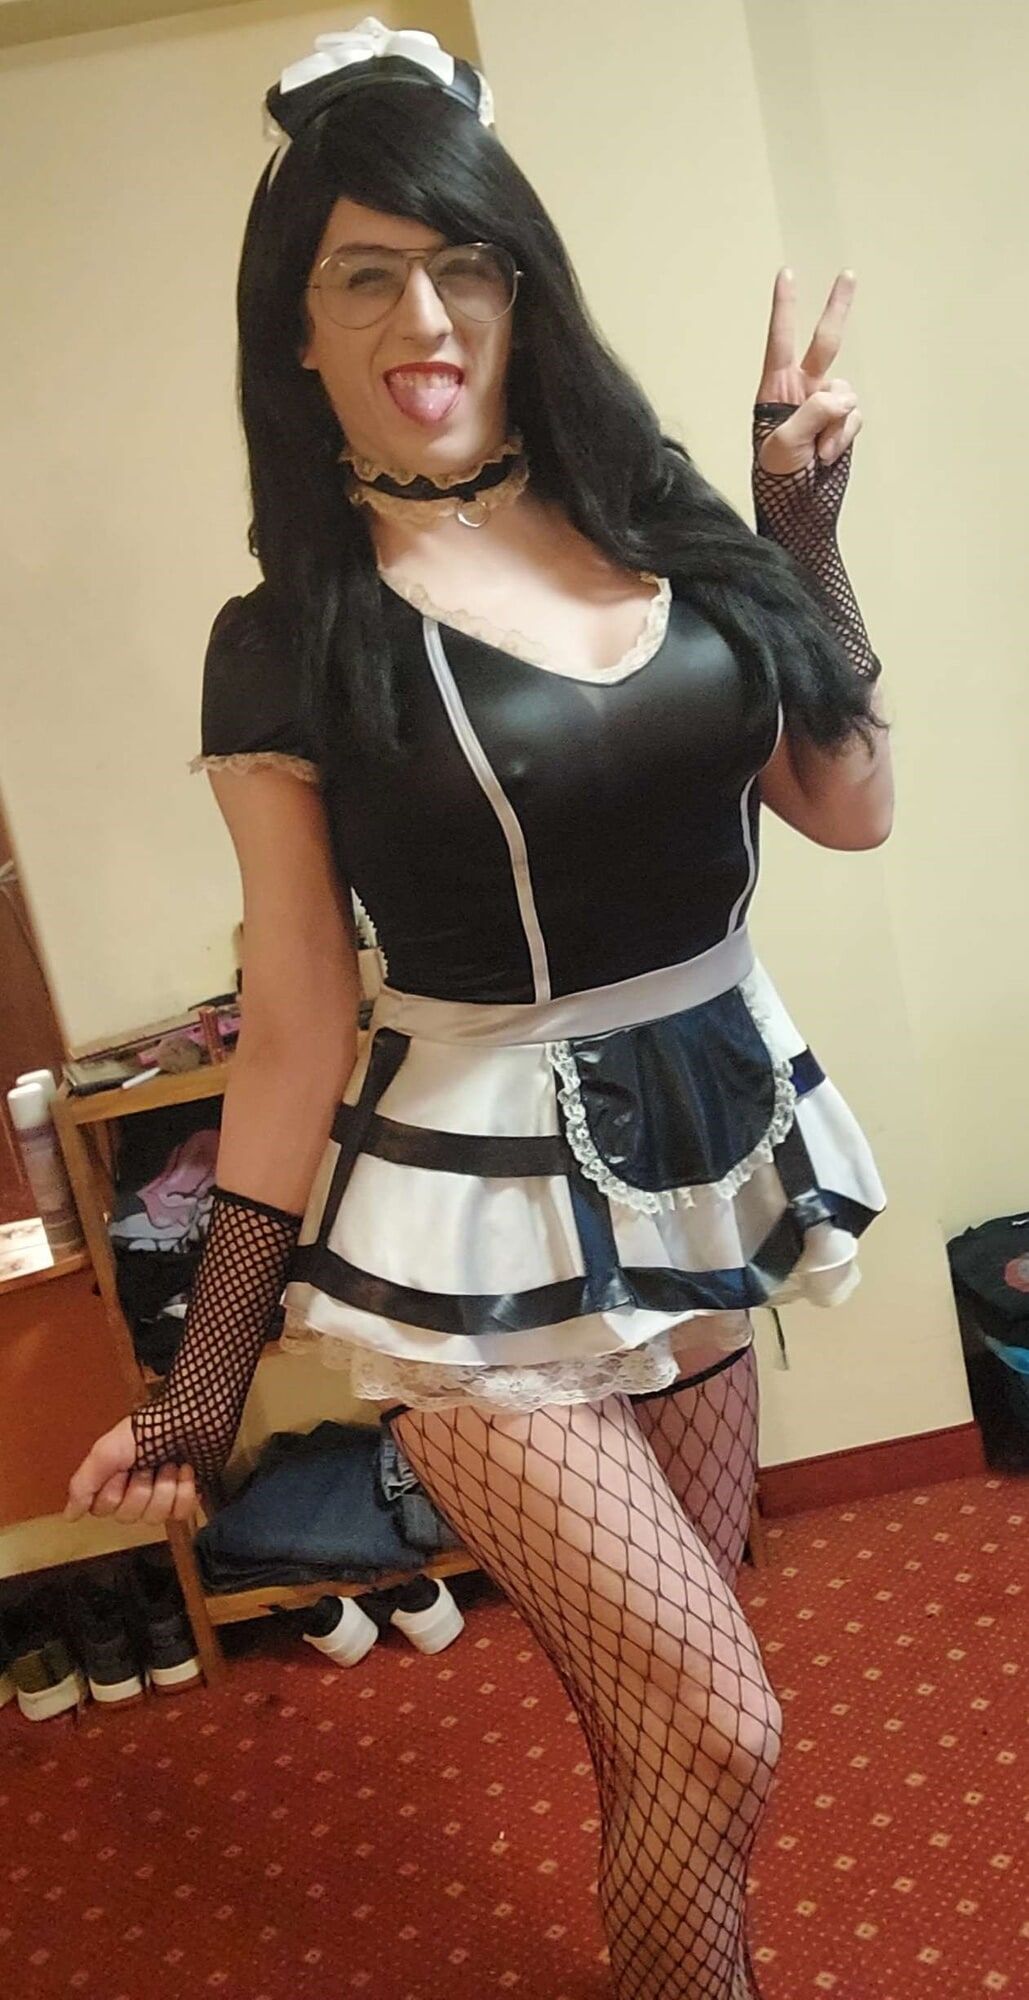 Maid Outfit #2